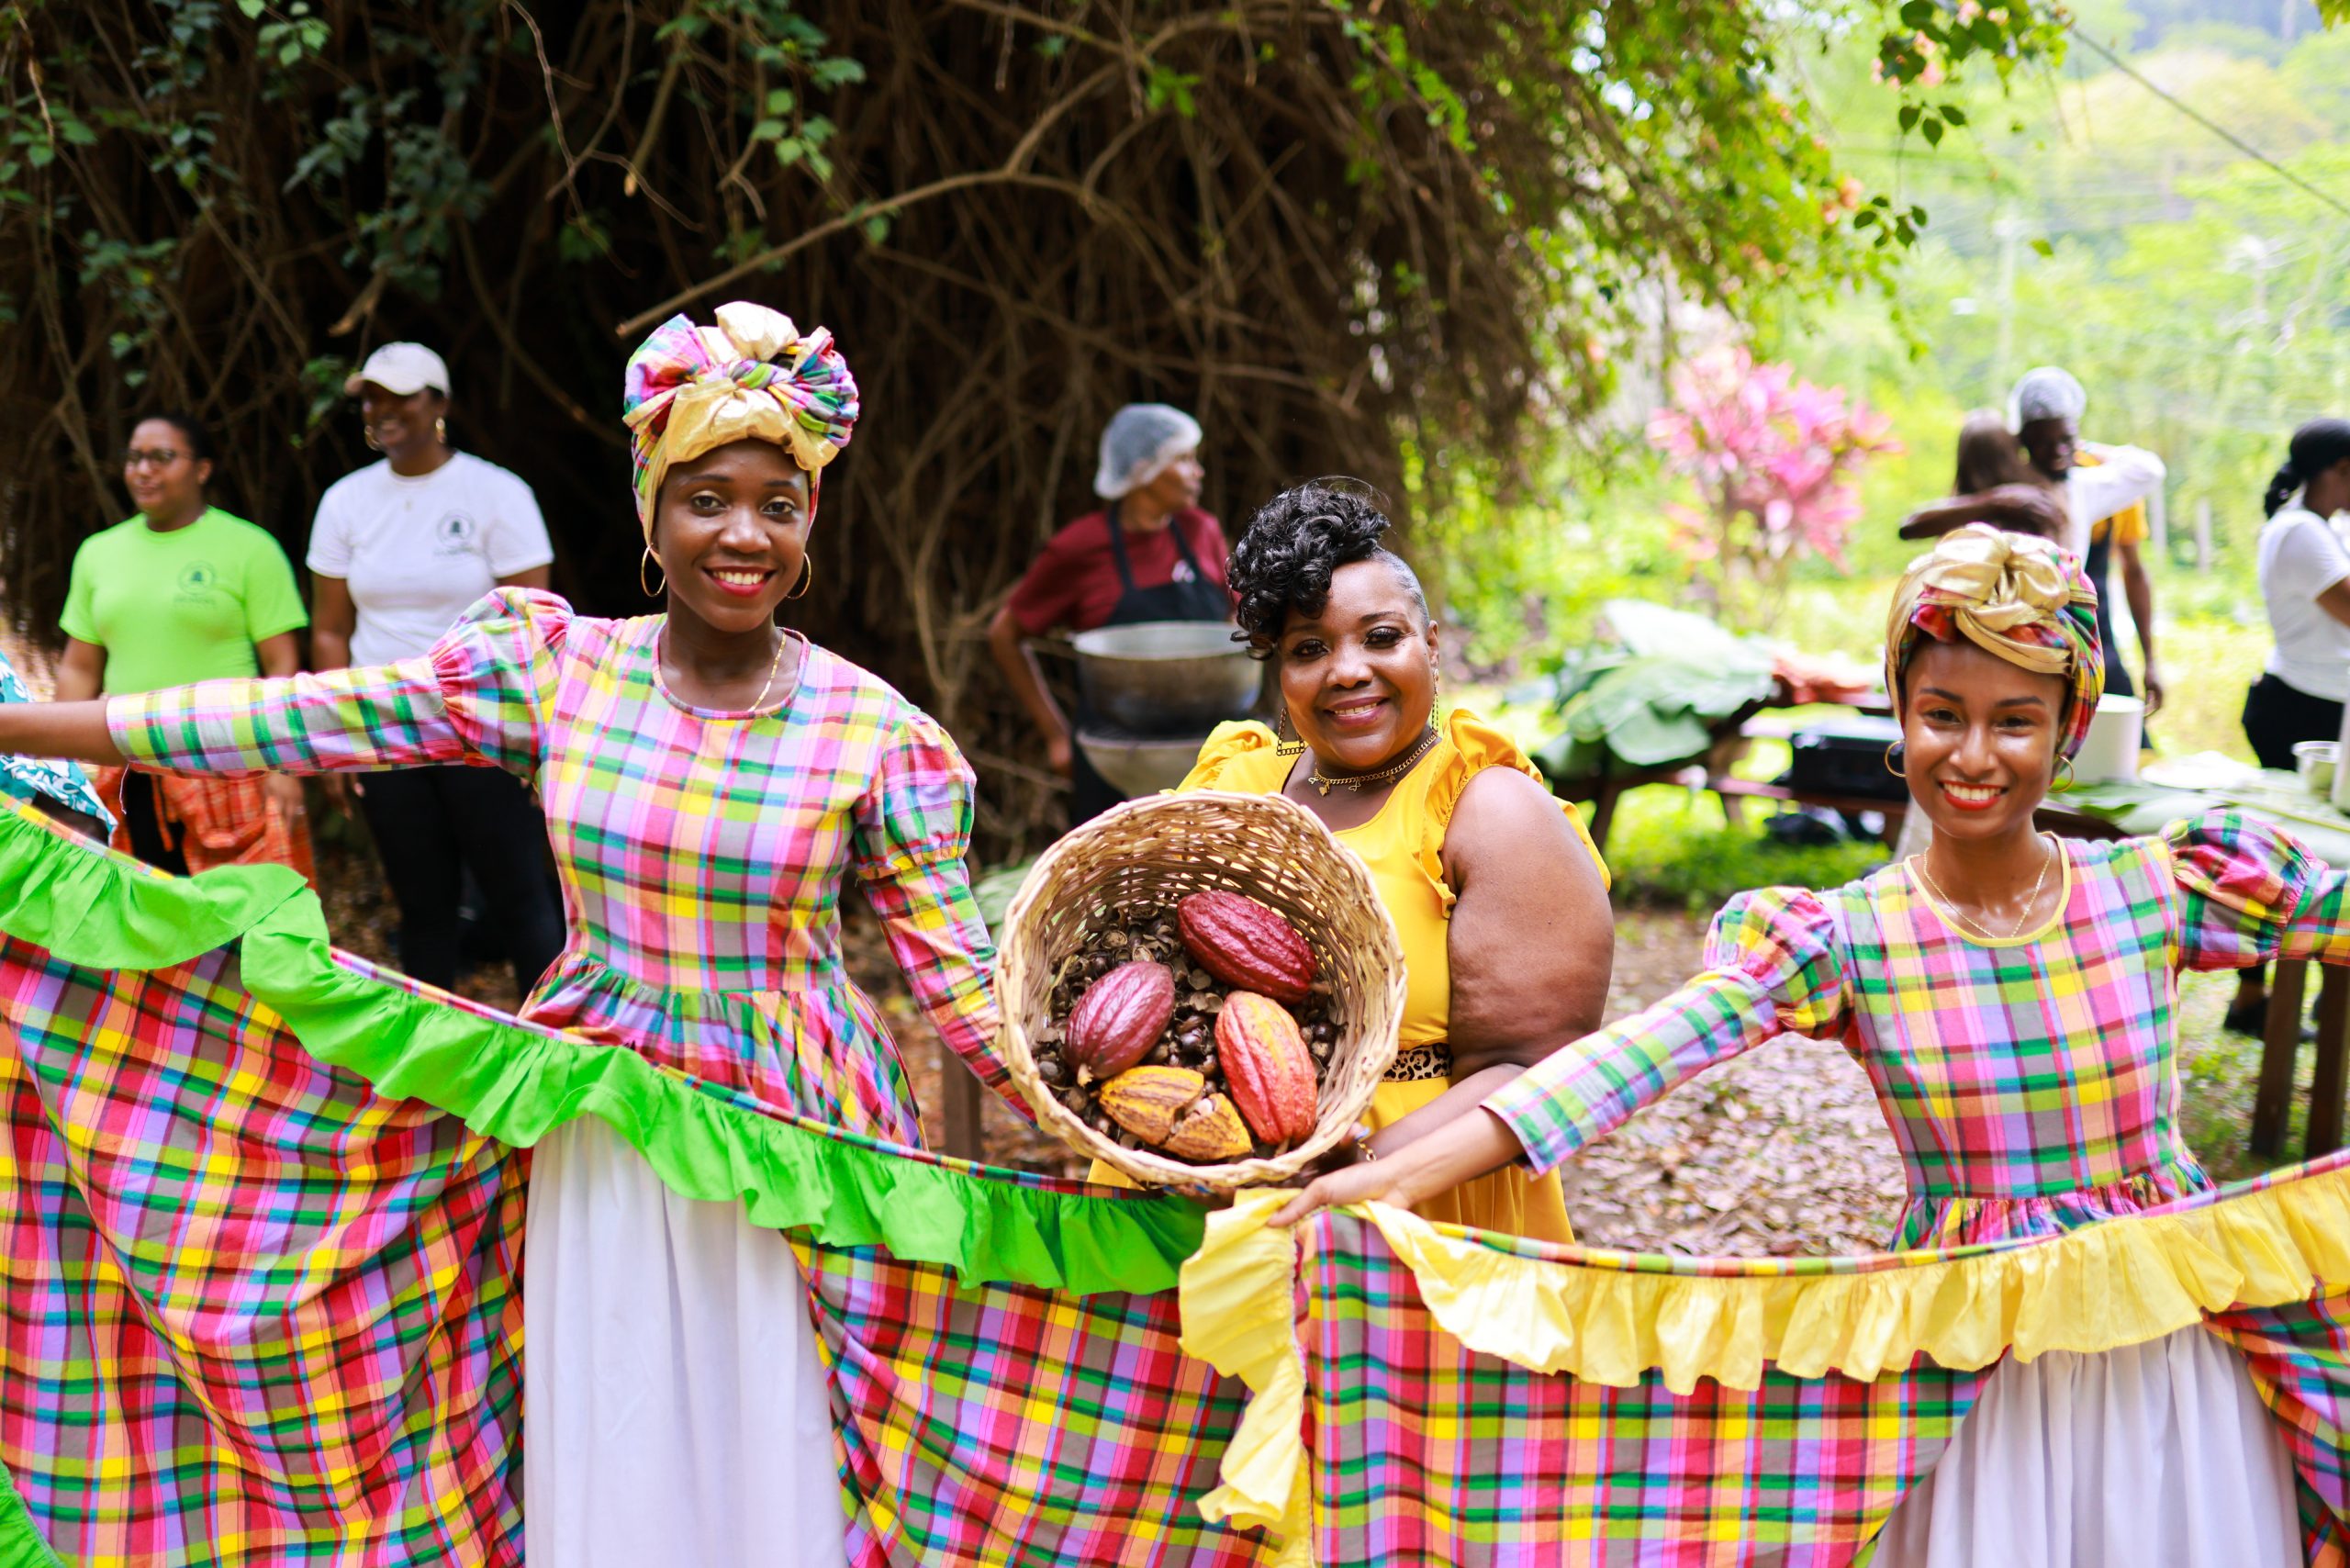 Grenada’s Chocolate Festival returns for its 10th year